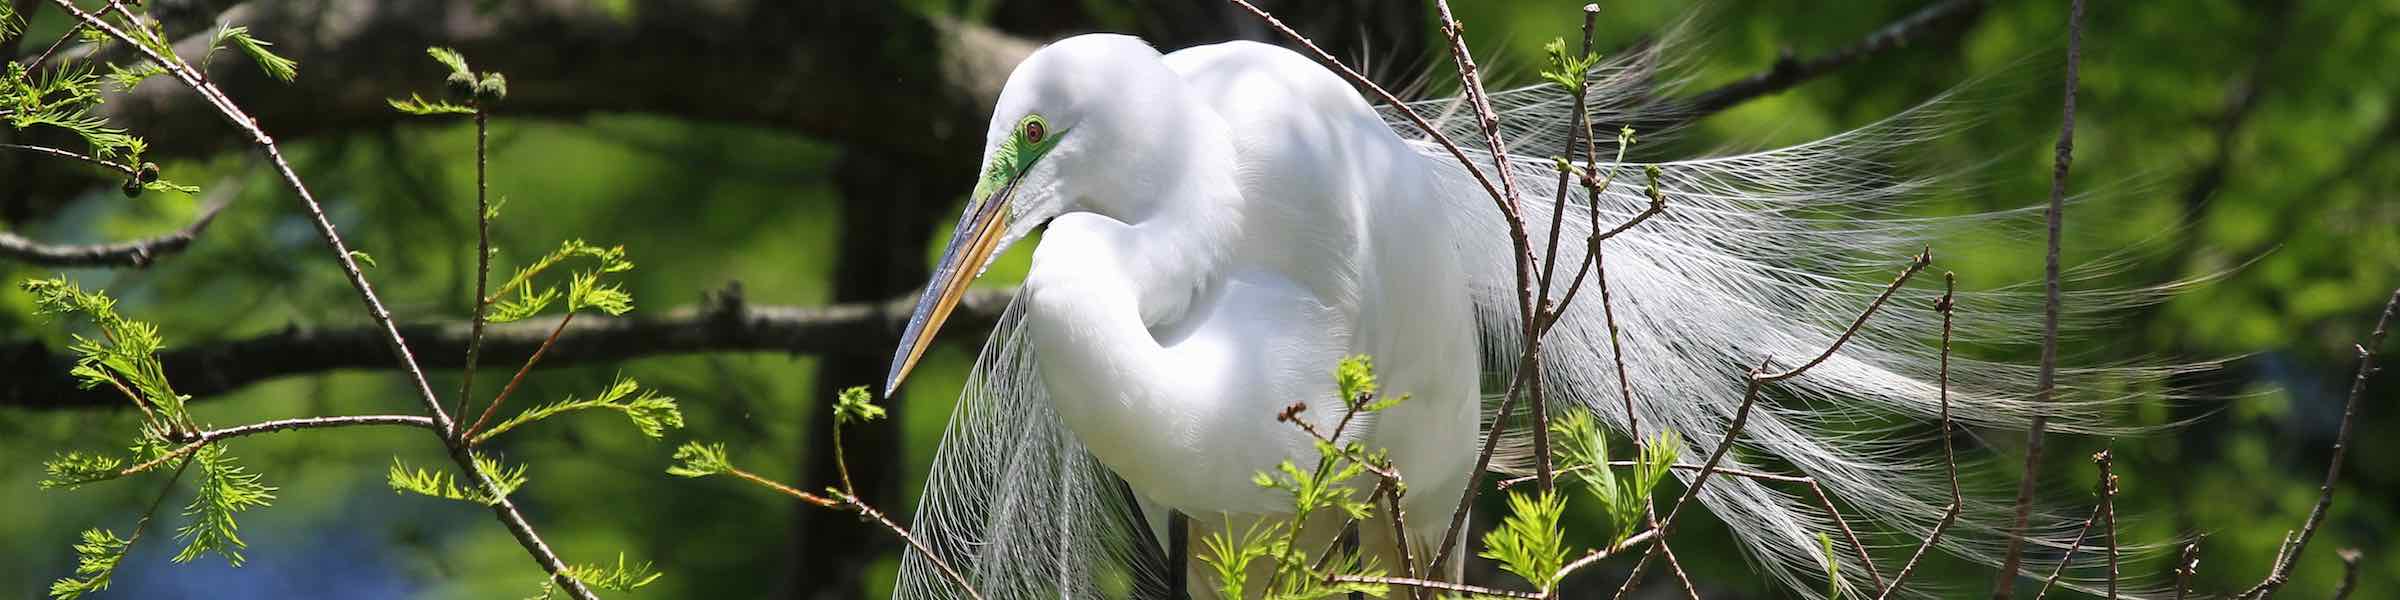 A great egret perched in a tree near Myrtle Beach, SC.